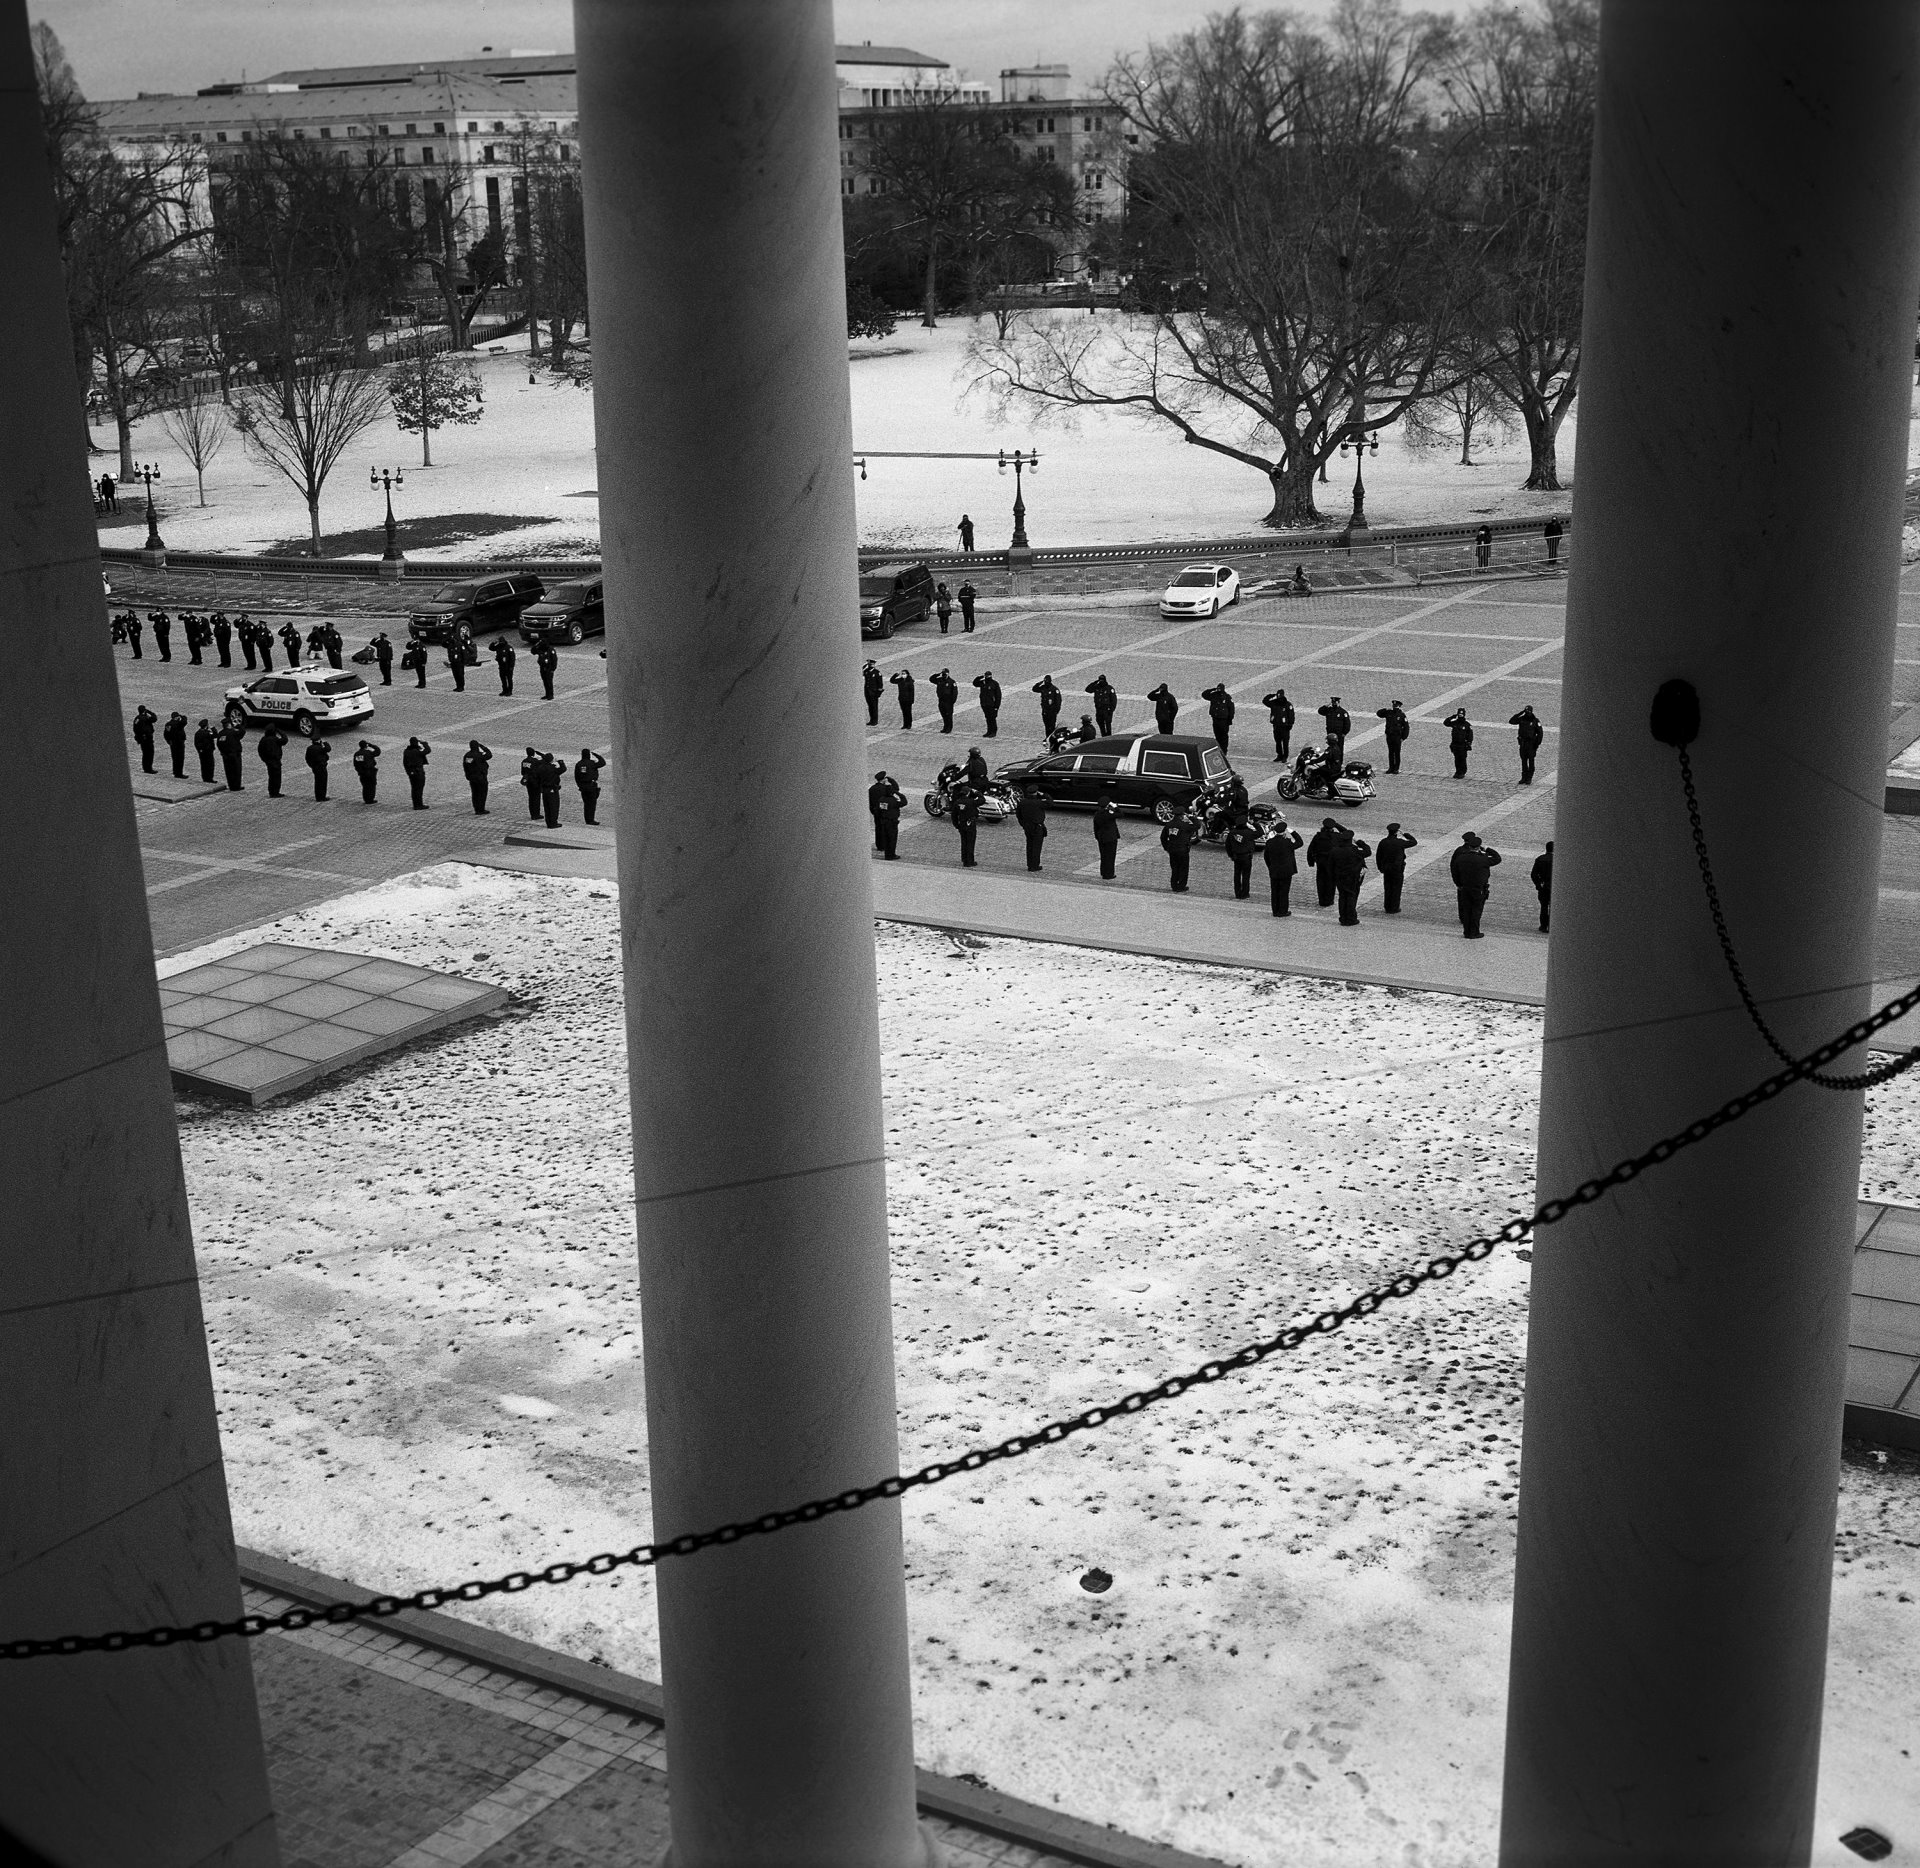 The remains of US Capitol Police Officer Brian Sicknick depart in a motorcade past a line of fellow police officers along the East Front, after lying in honor in the Capitol Building. Officer Sicknick died of a stroke after defending the building against pro-Trump protesters on 6 January.